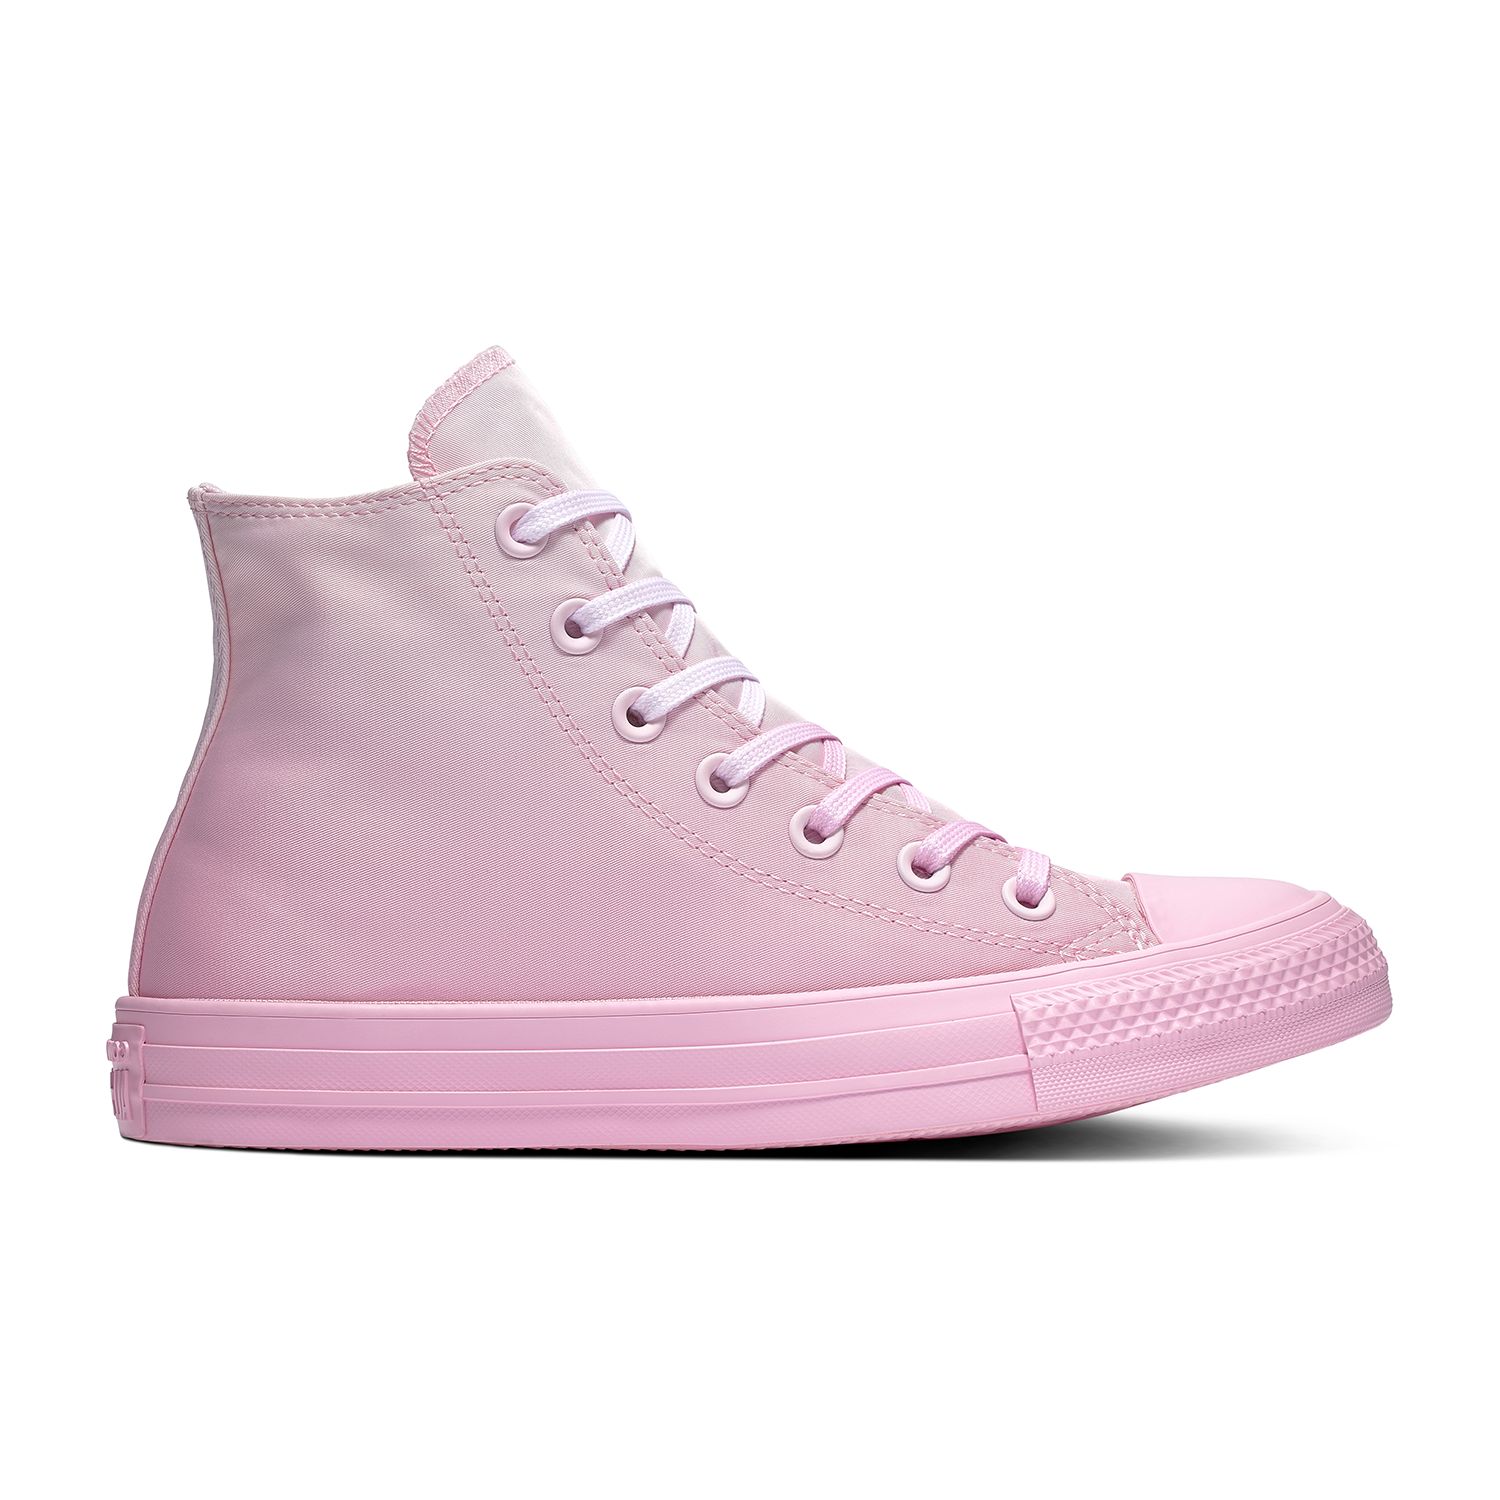 converse chuck taylor all star ombre wash high top